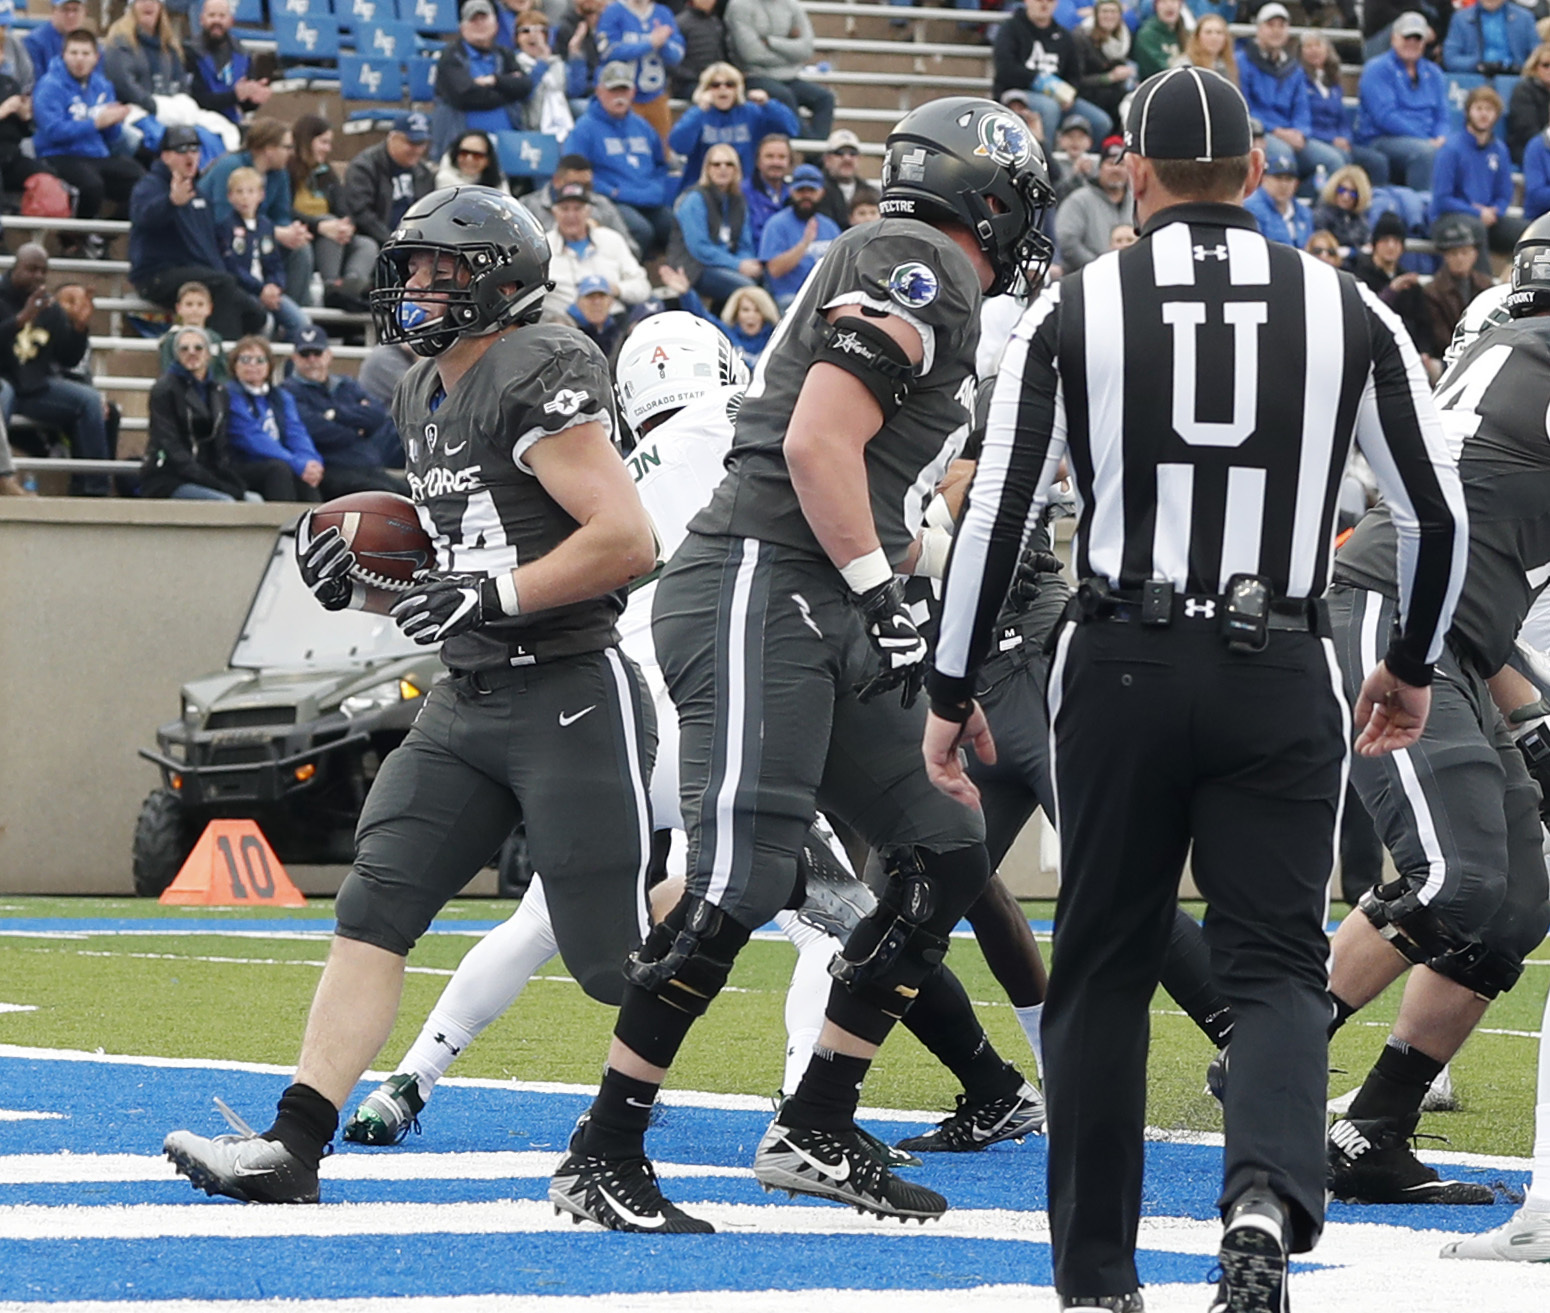 Fagan rushes for 260, Air Force beats Colorado State 27-19